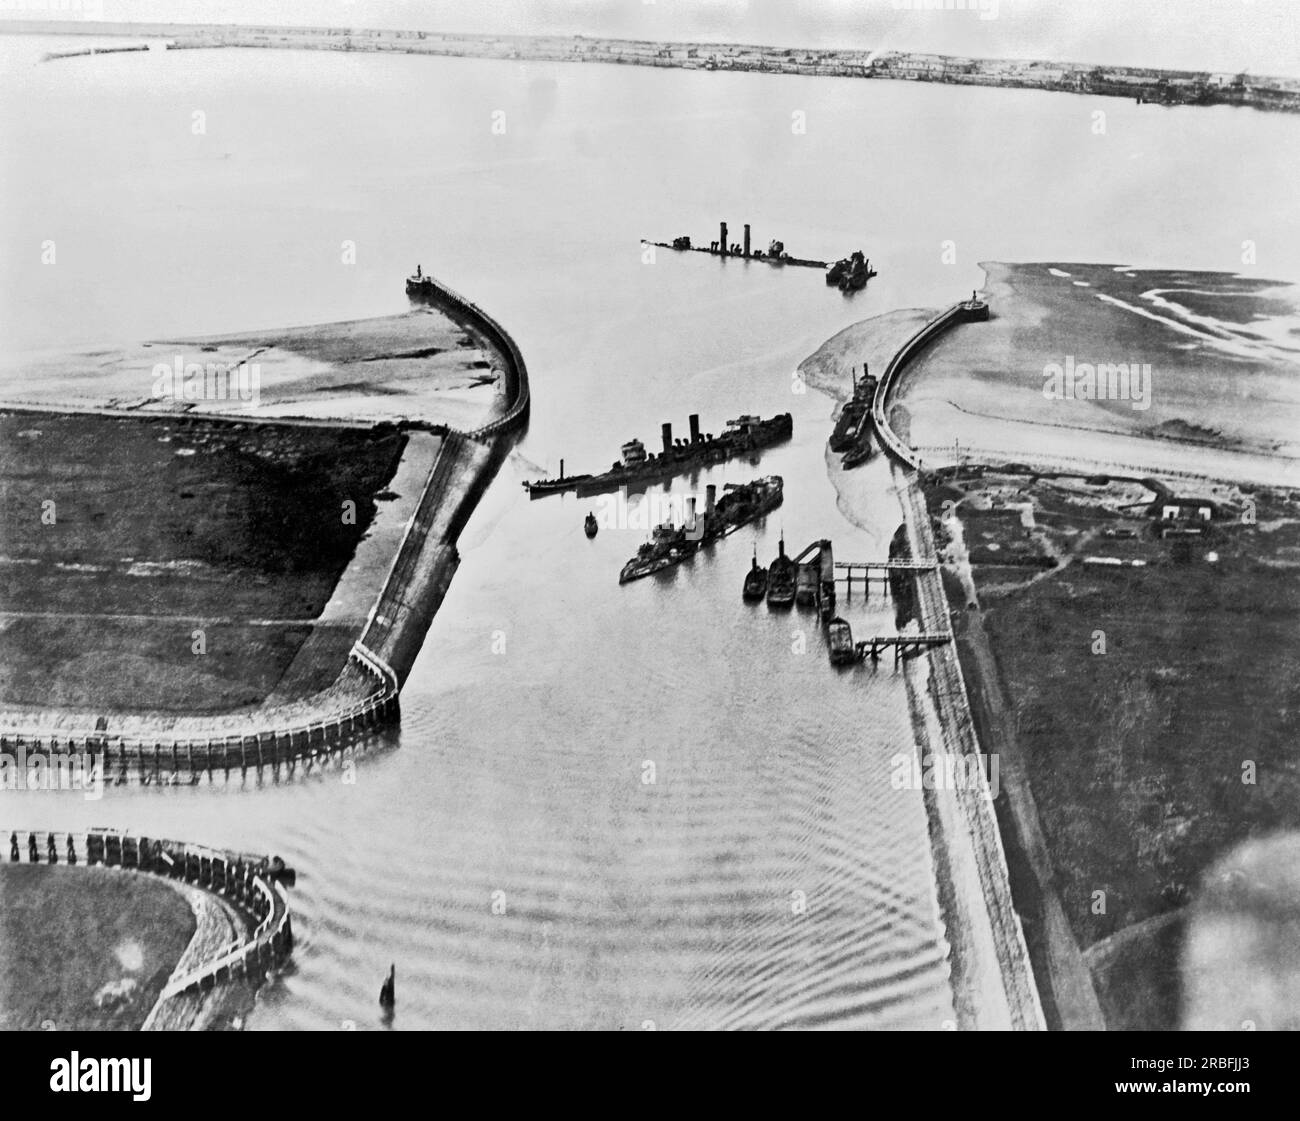 Zeebrugge, Belgium:  April, 1918 An aerial view of the entrance to the Bruges Canal at Zeebrugge with the sunken British ships Thetis, Intrepid, and Iphigenia. It was an attempt to block the port which was used by the German Navy as a base for their U-boats, but largely failed. A dredge can be seen at right clearing a channel which the Germans could still use at high tide. Stock Photo